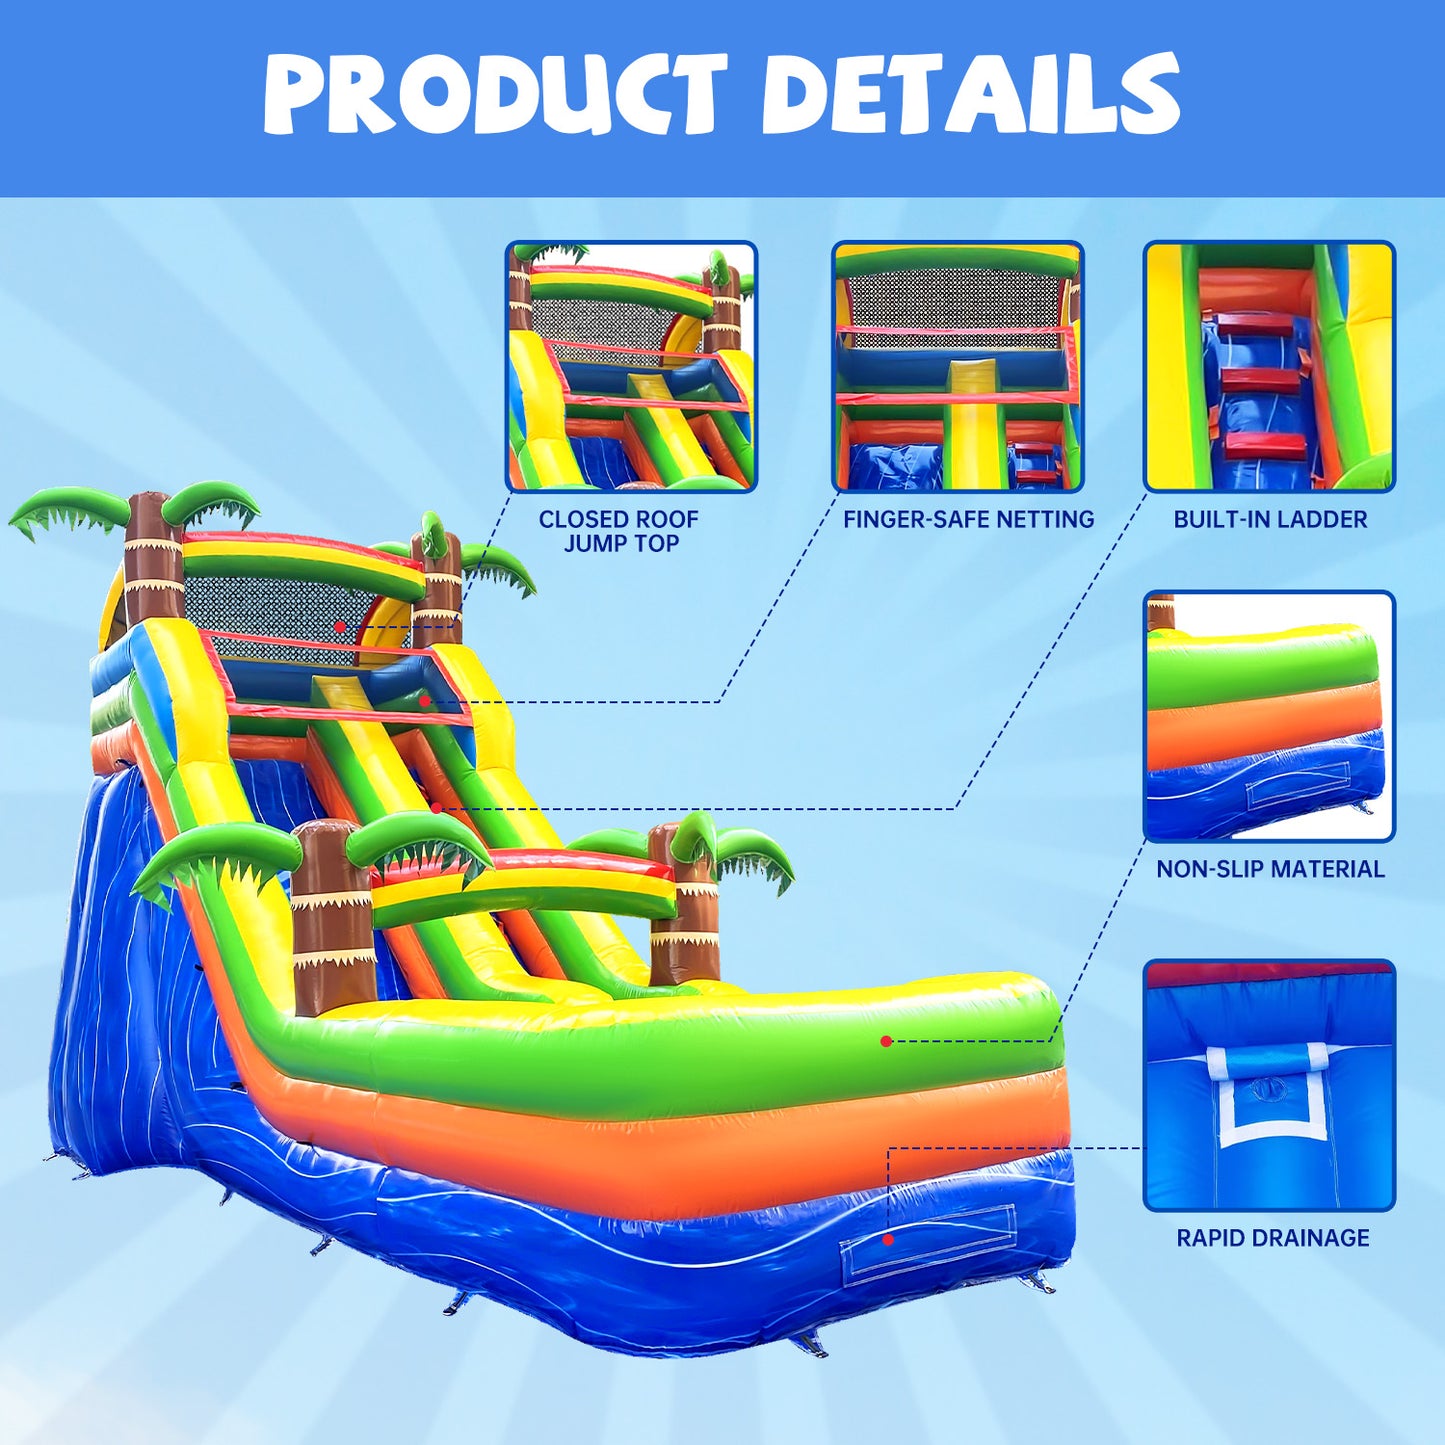 25' x 12' x 16' Wet/Dry Commercial-grade Inflatable Water Slide #11187